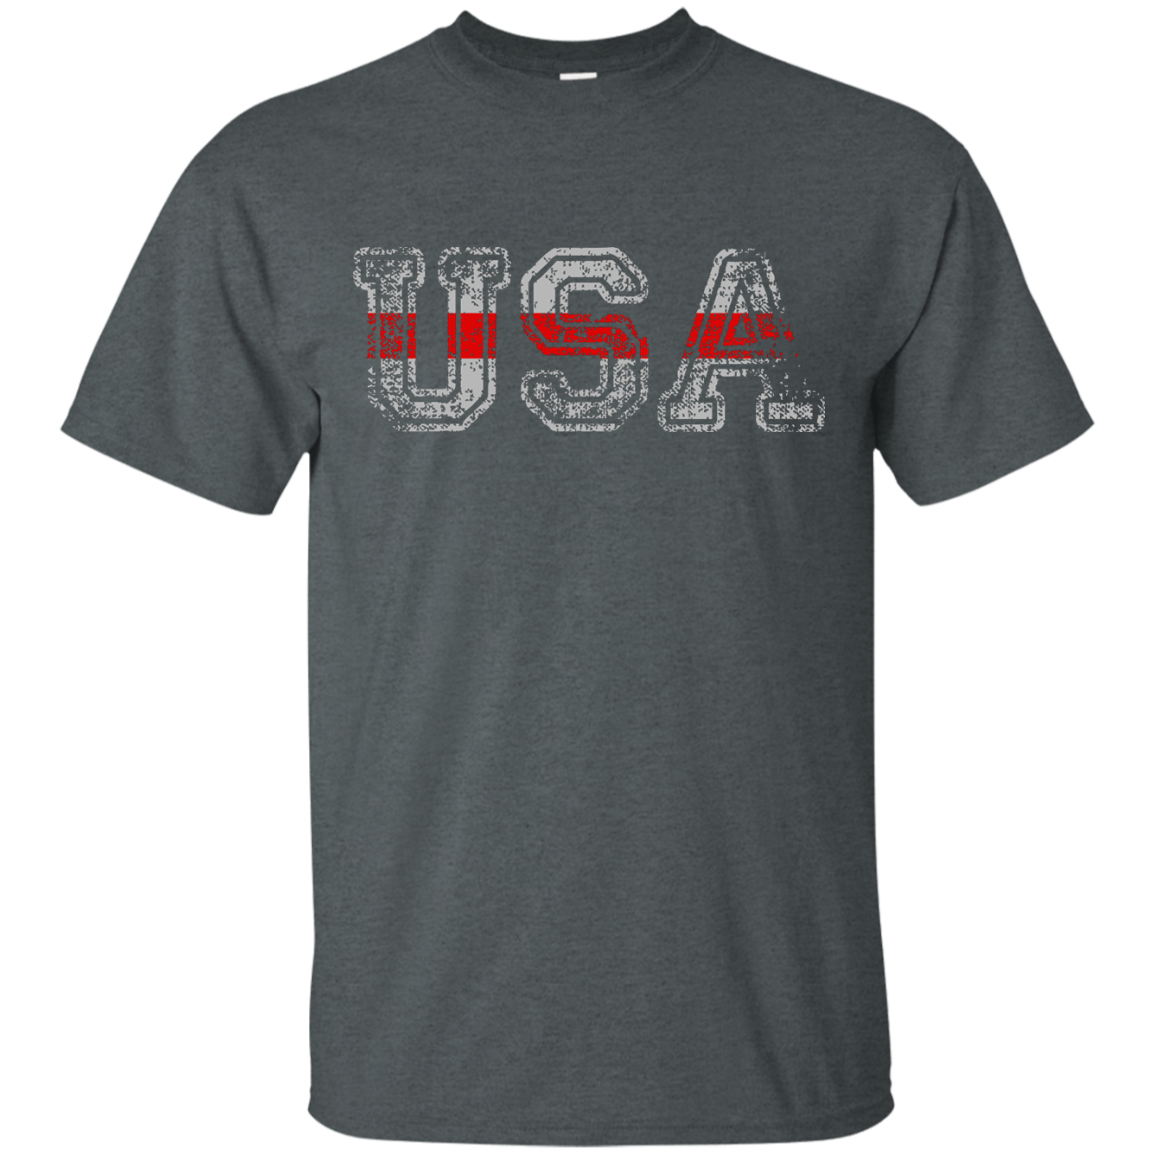 USA, The Strong - T Shirt